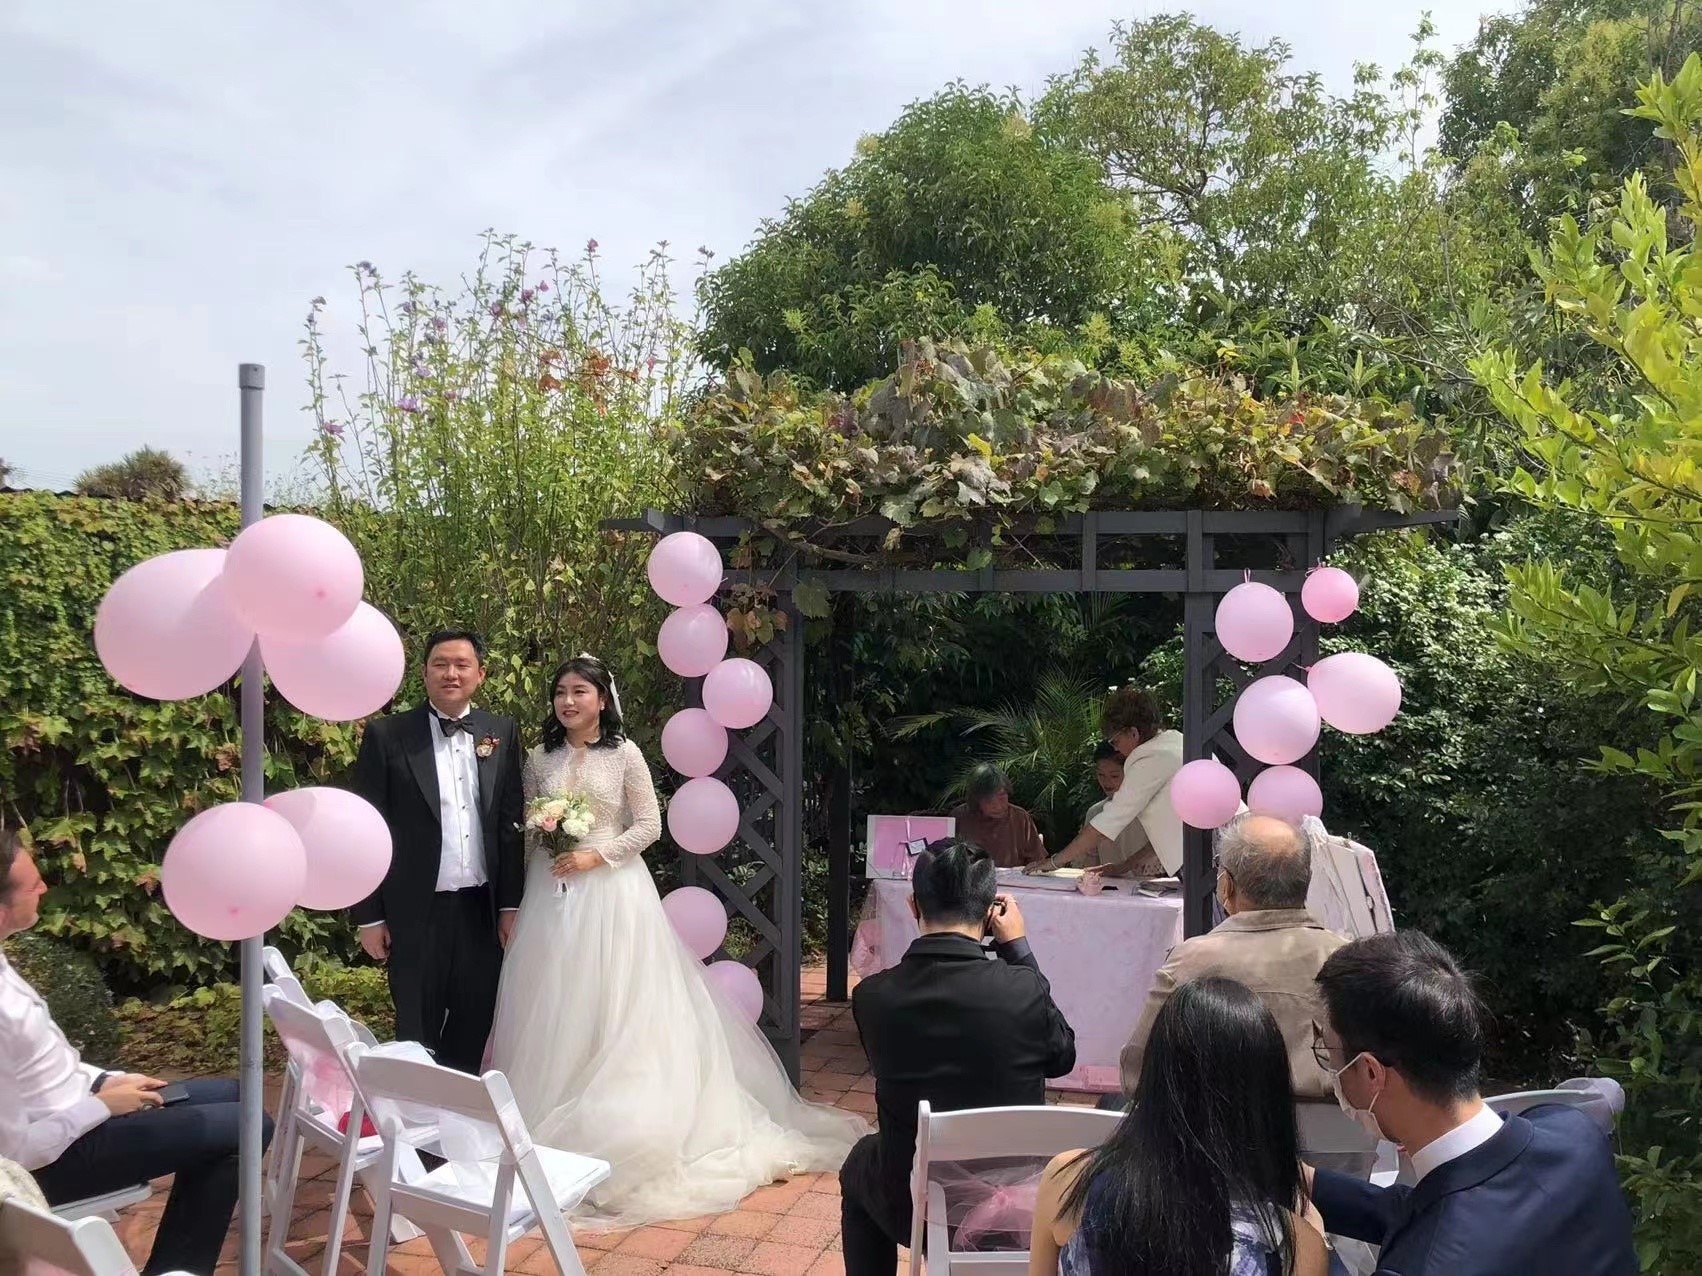 Ms Connie Zhang got married without her parents 